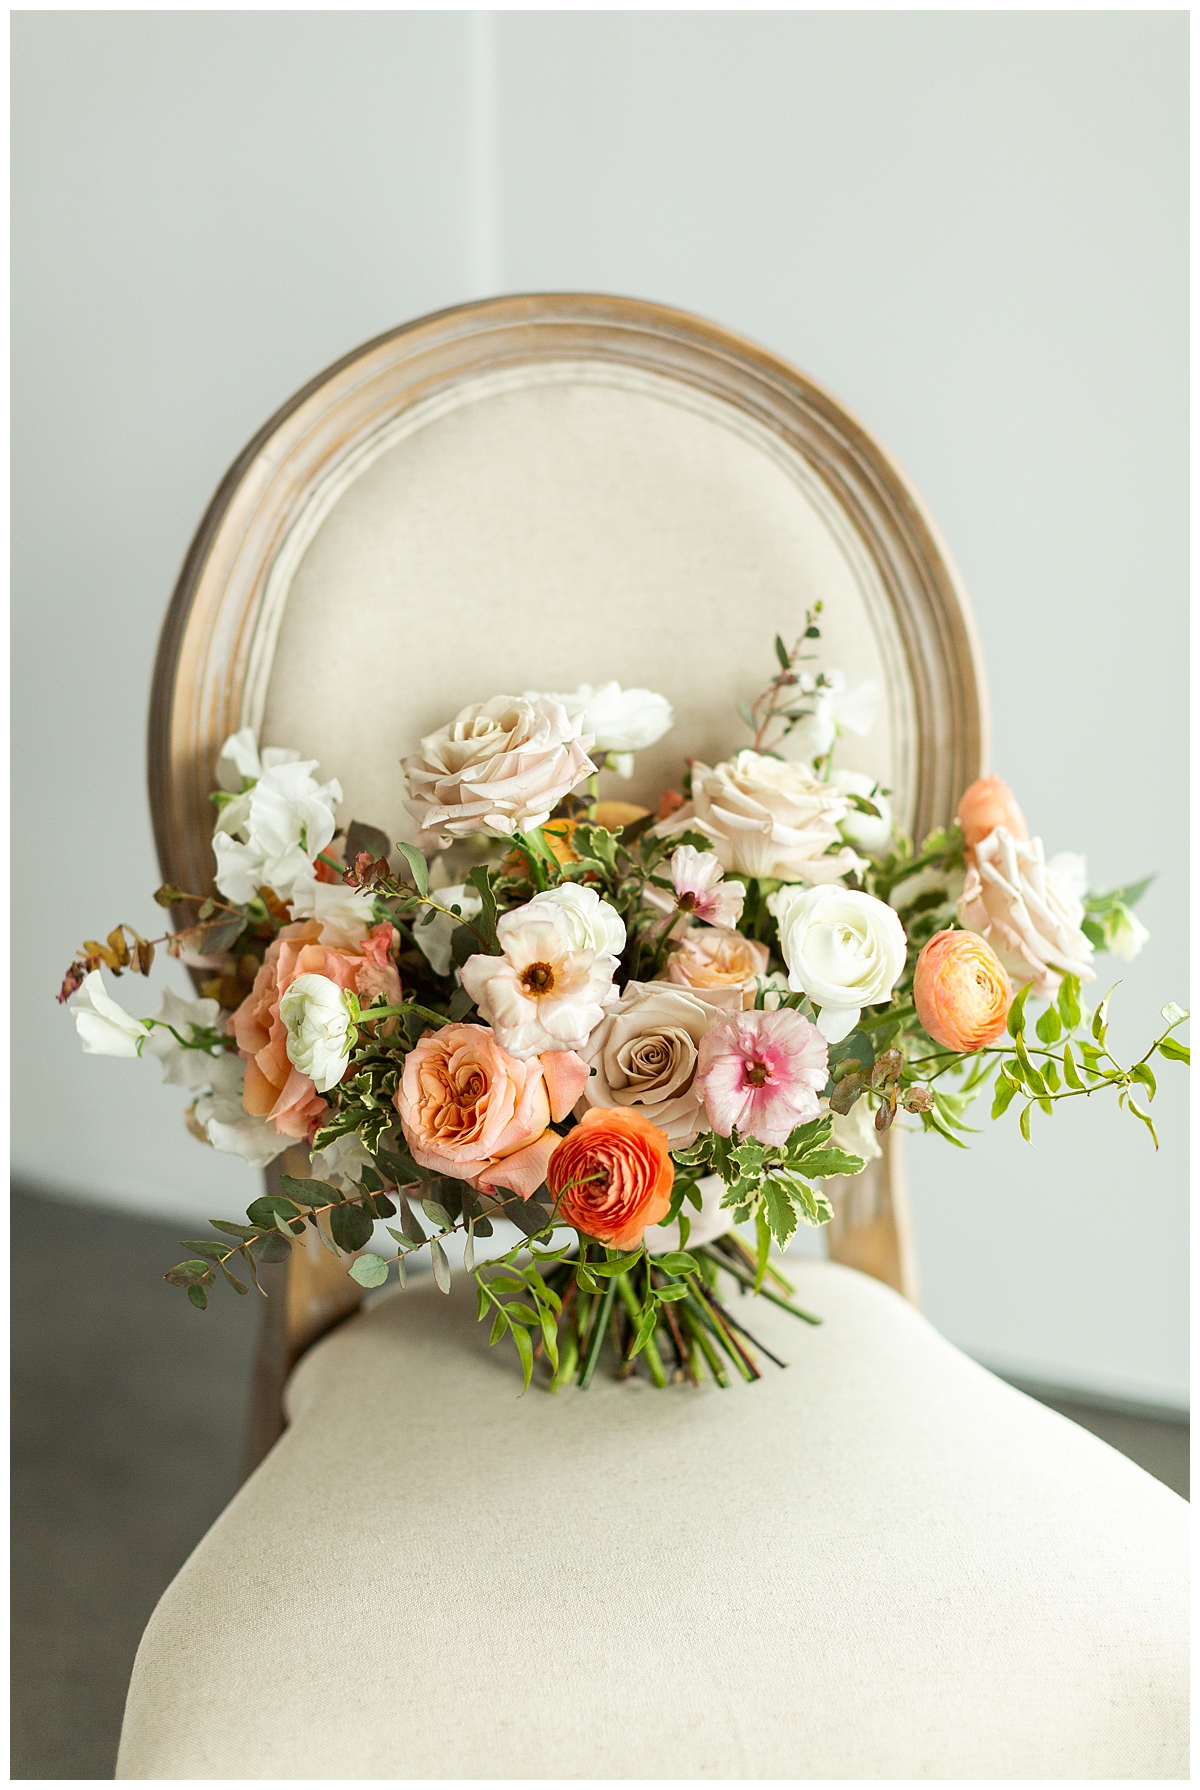 Bride's bouquet displayed on a cream chair